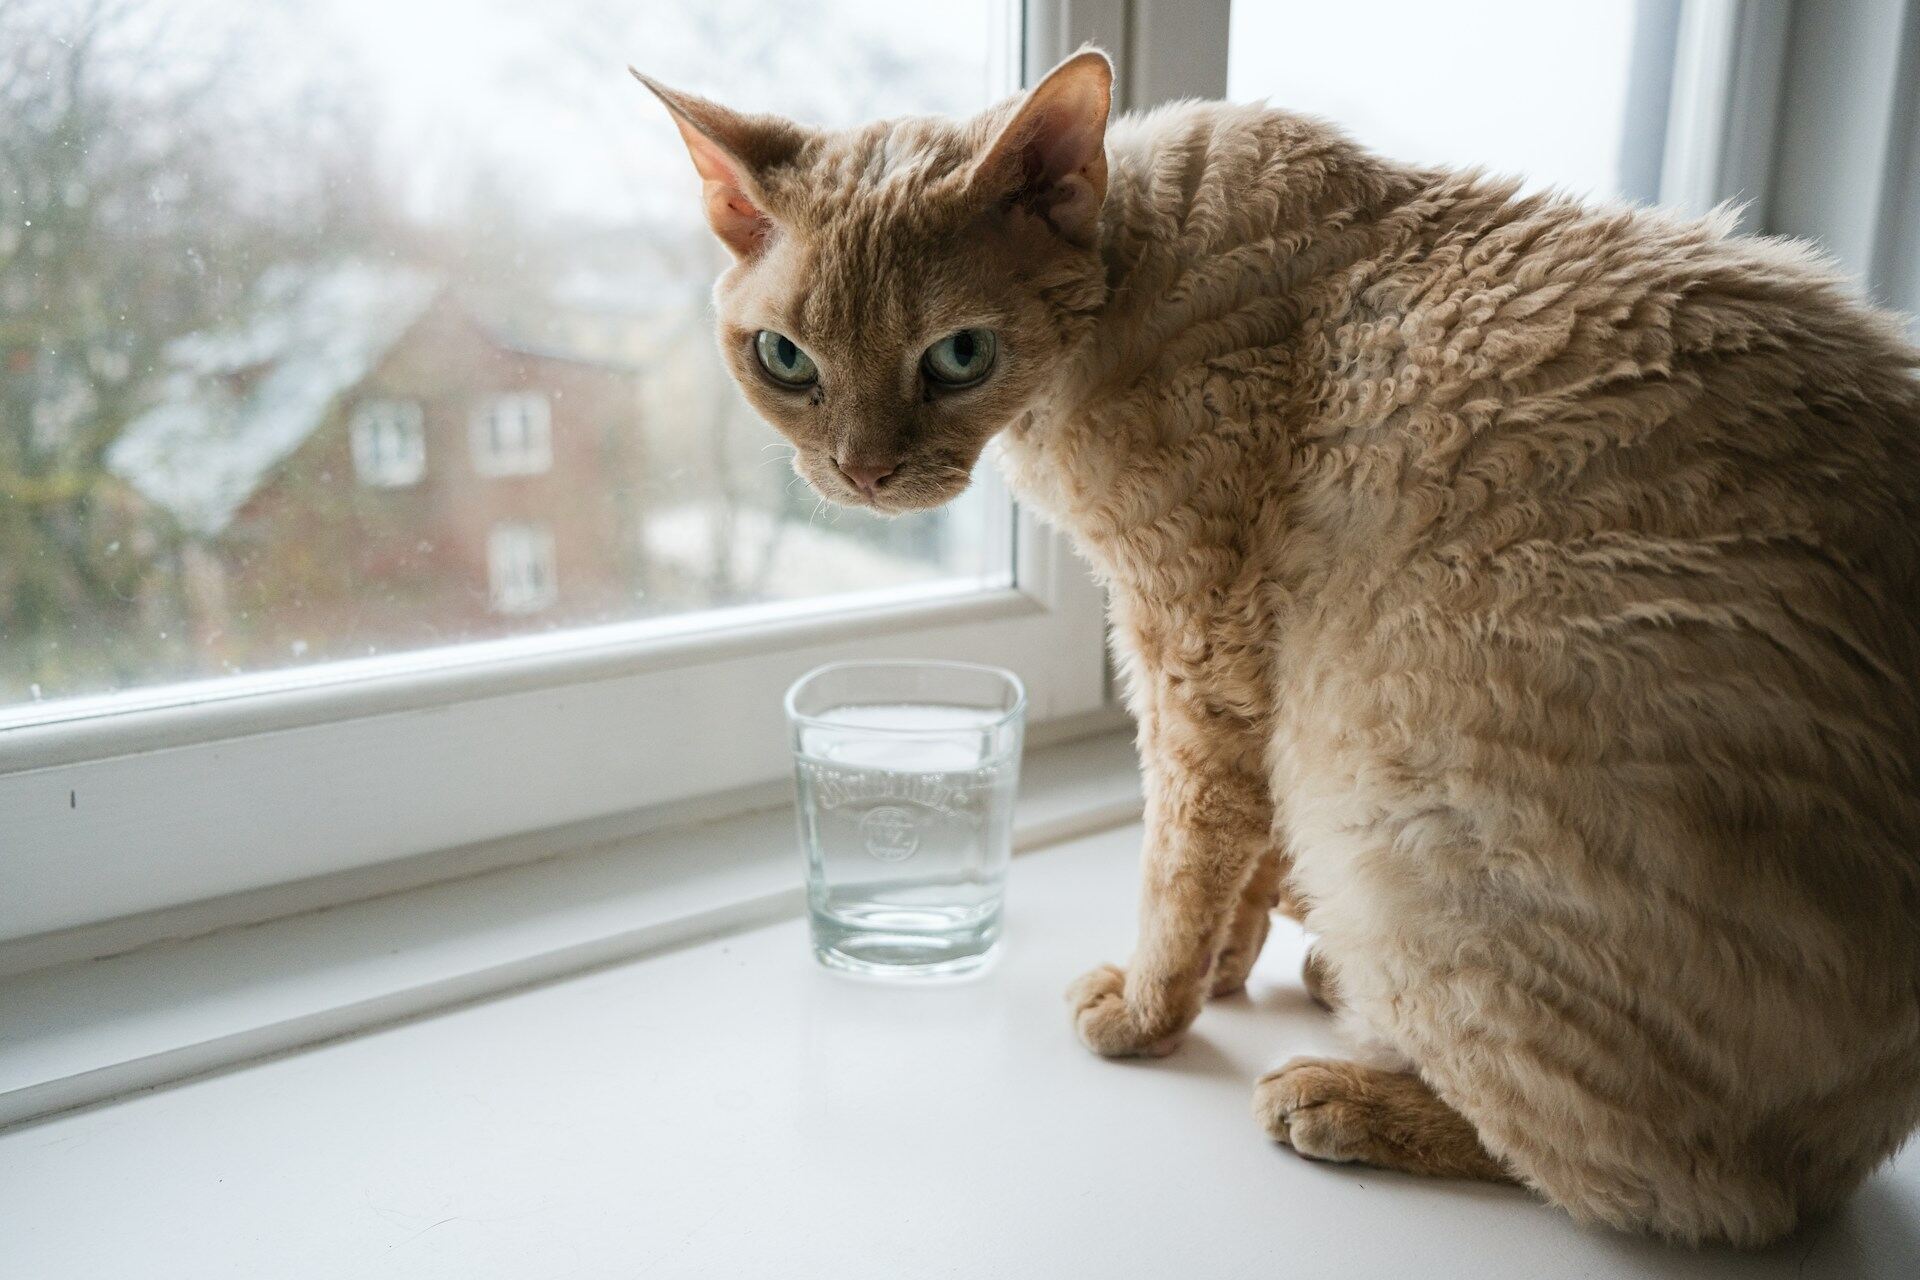 A Devon Rex cat sitting by a window and a glass of water